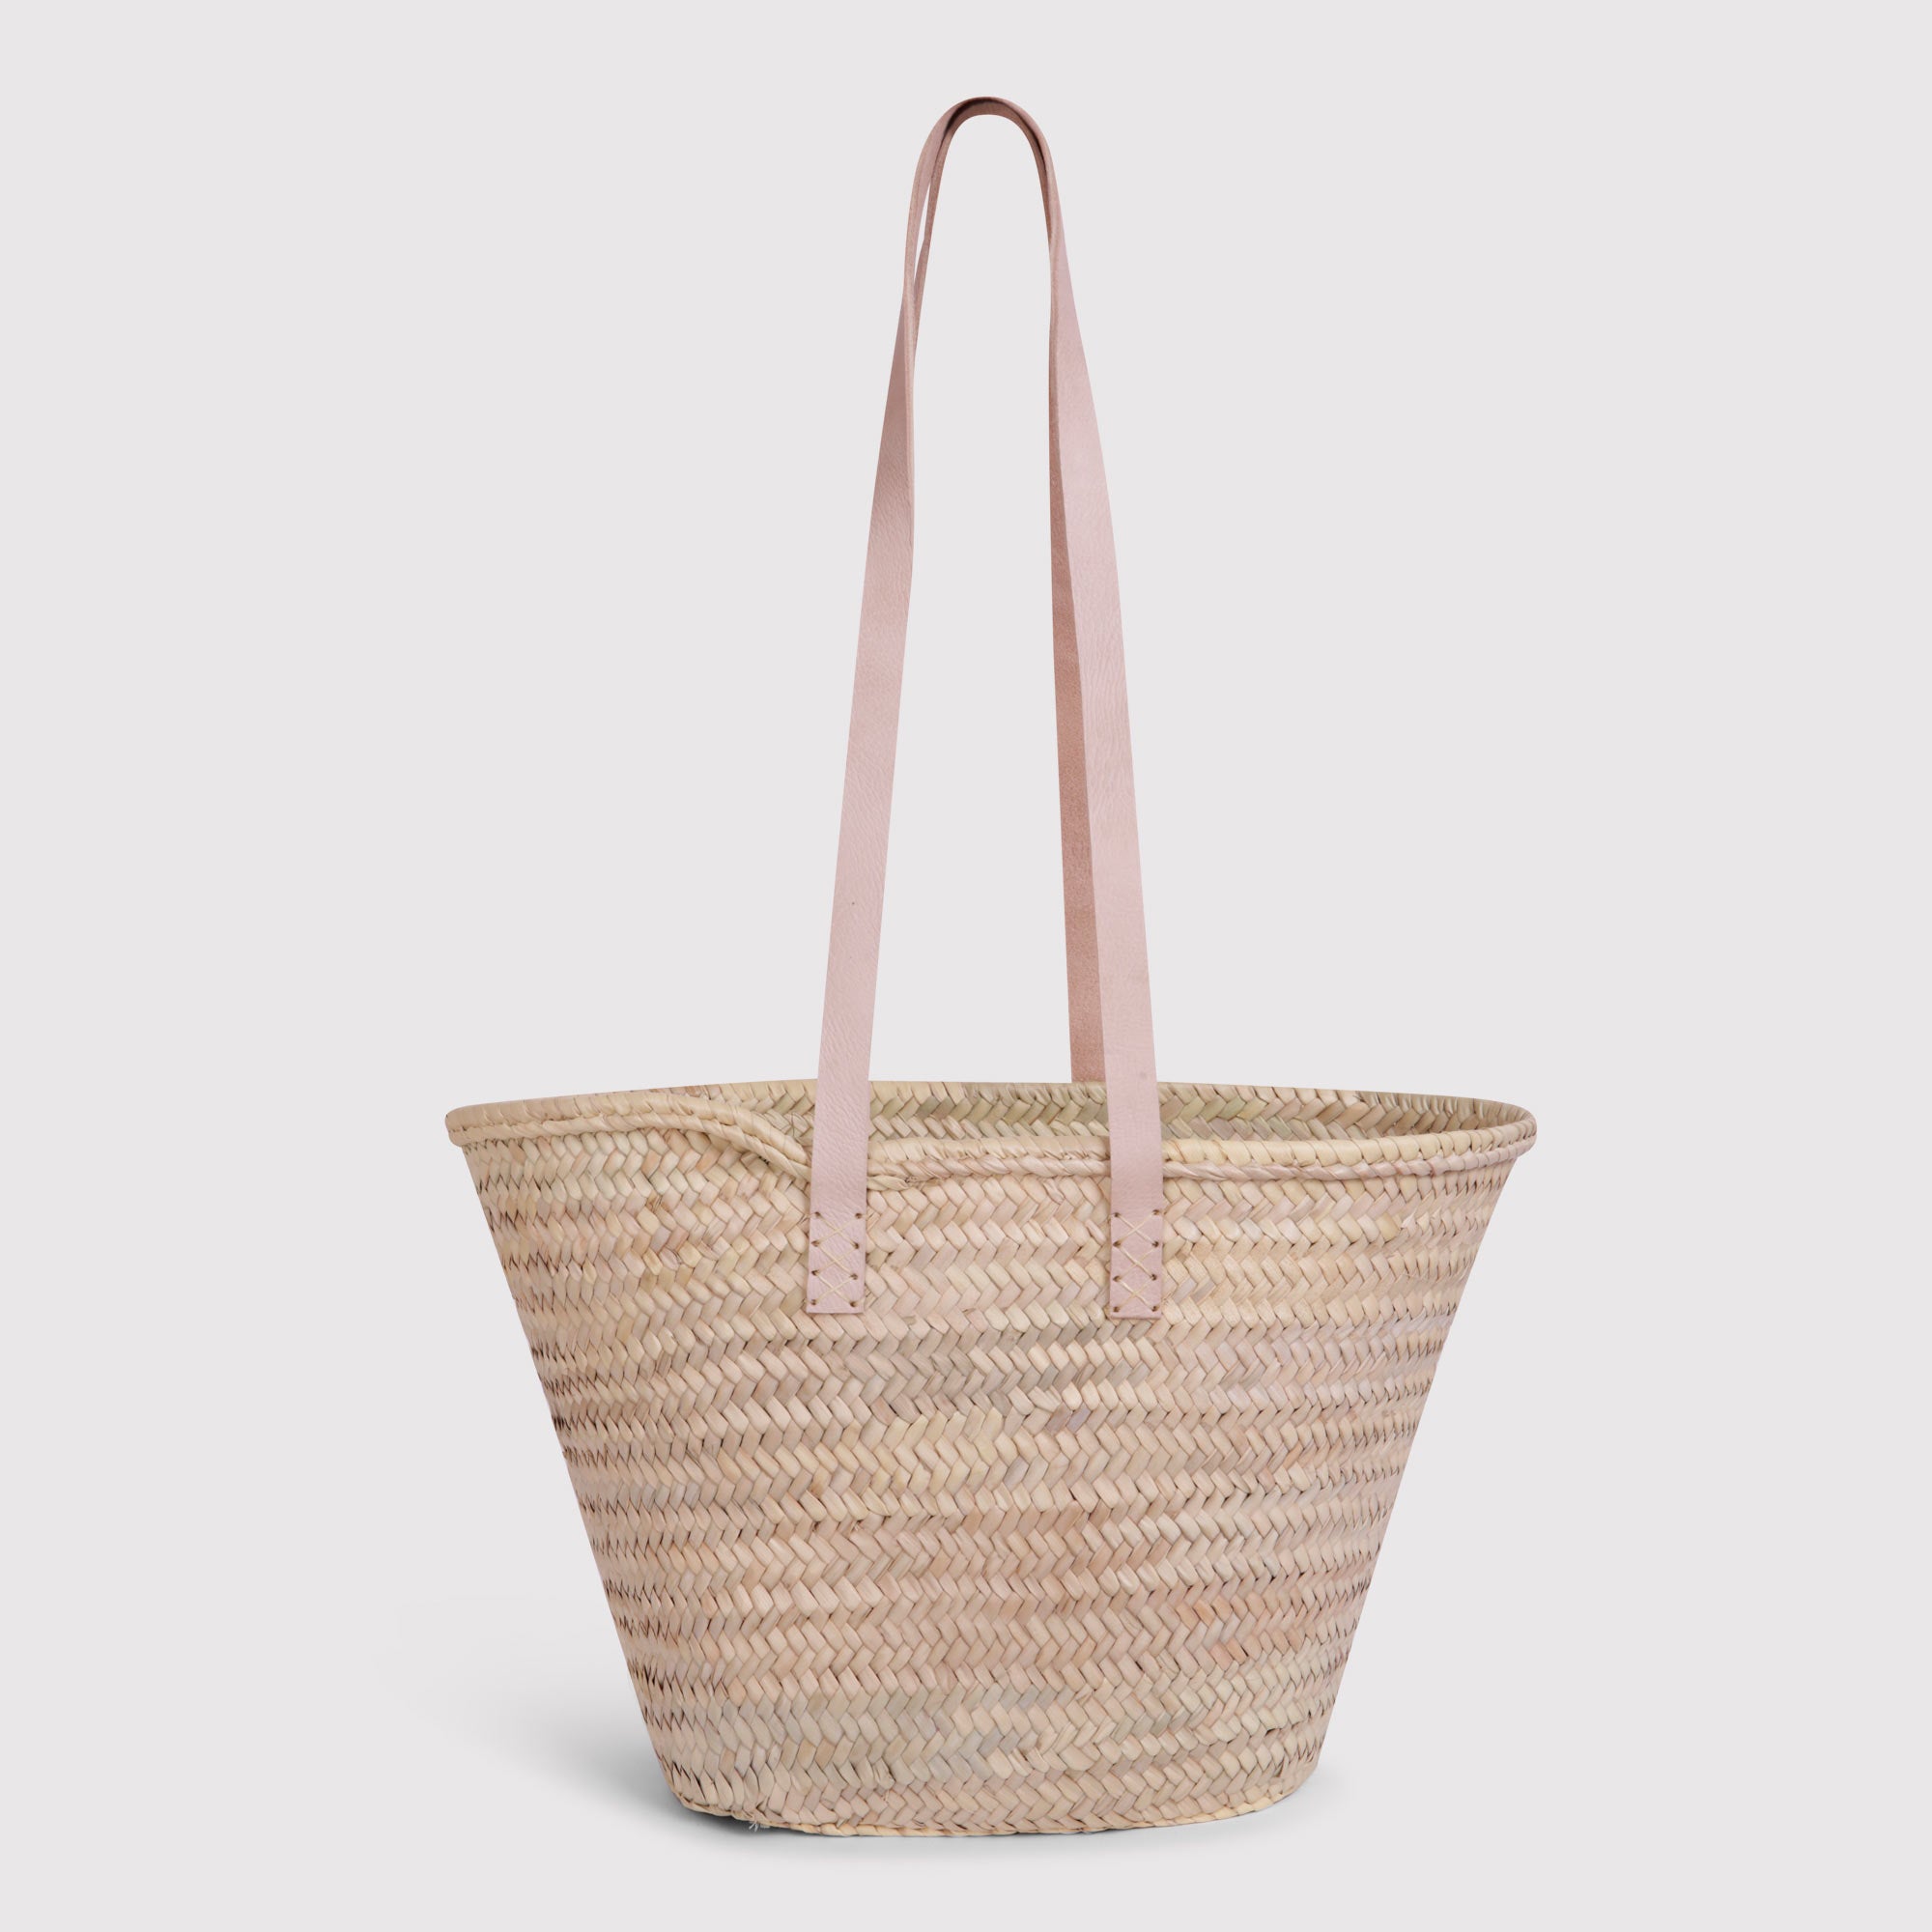 Original Straw French Basket, Handcrafted Straw Bag, Leather French Market Basket, Beach Bag, Handmade Woven Bag Pineapple